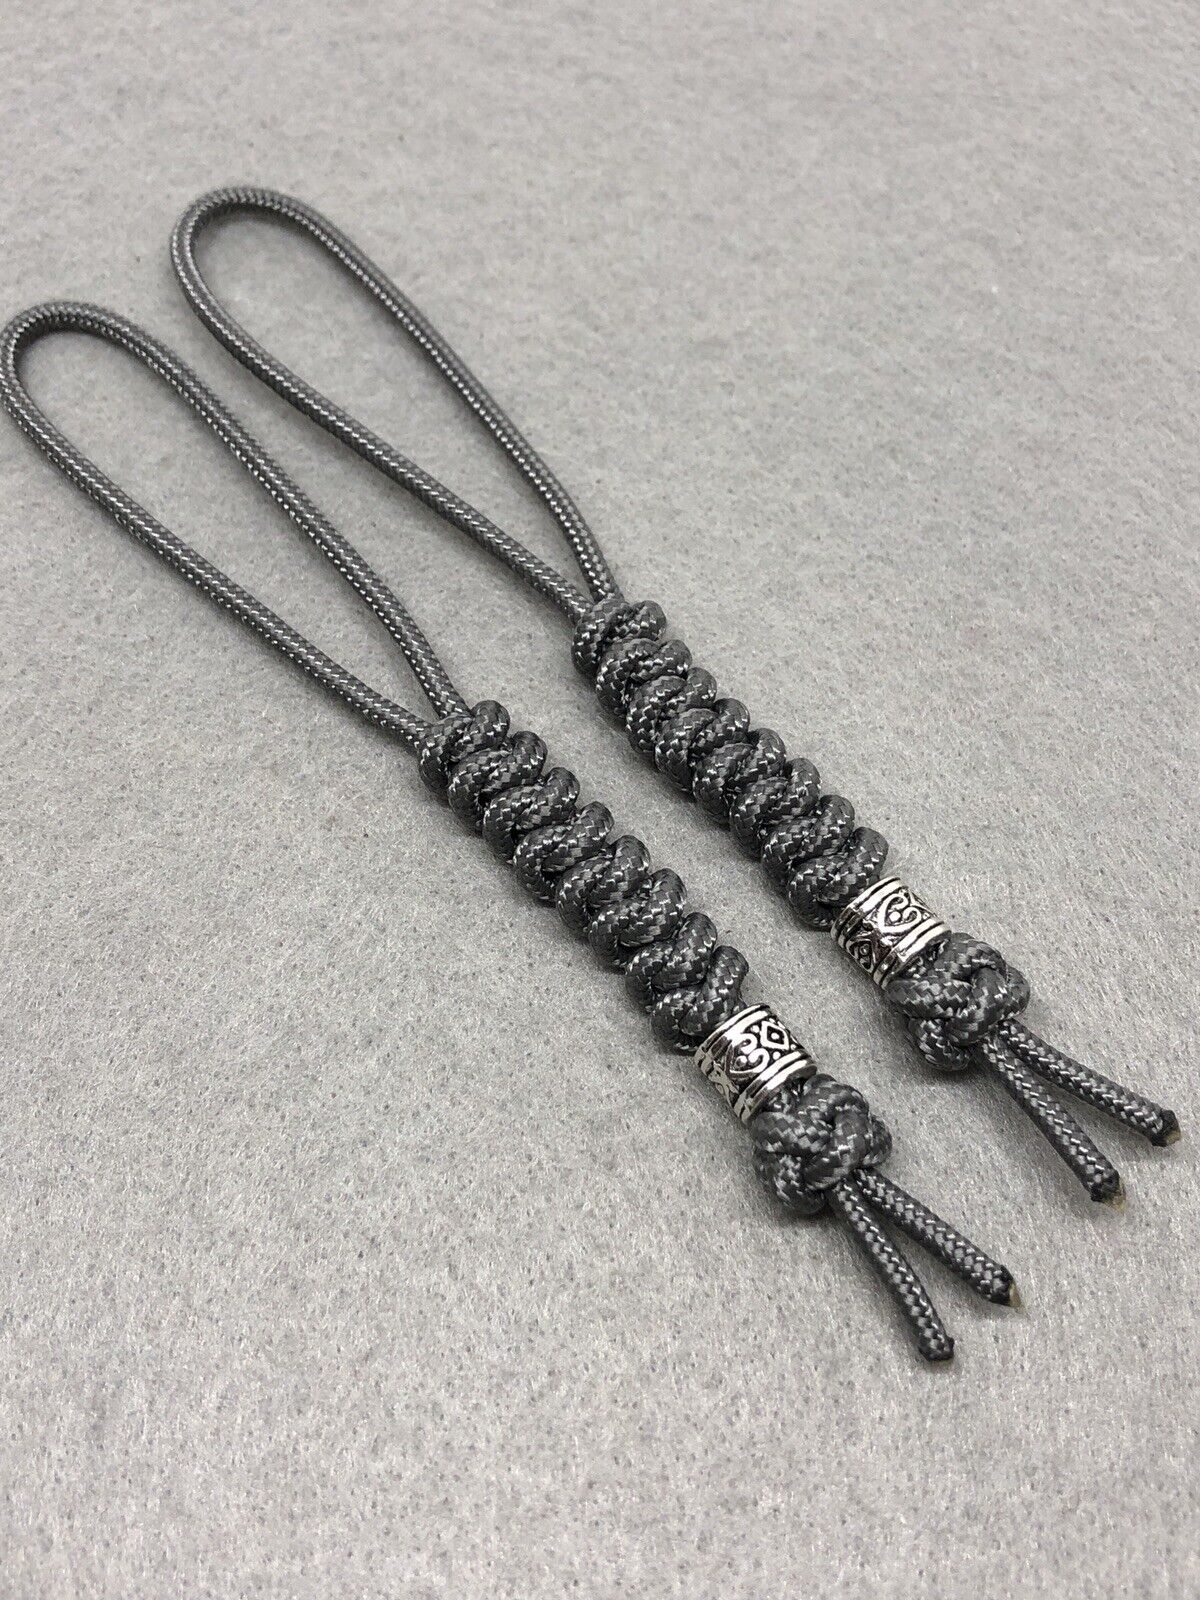 275 Paracord  Knife Lanyard 2pk Graphite Cord Snake Knot With Metal Bead